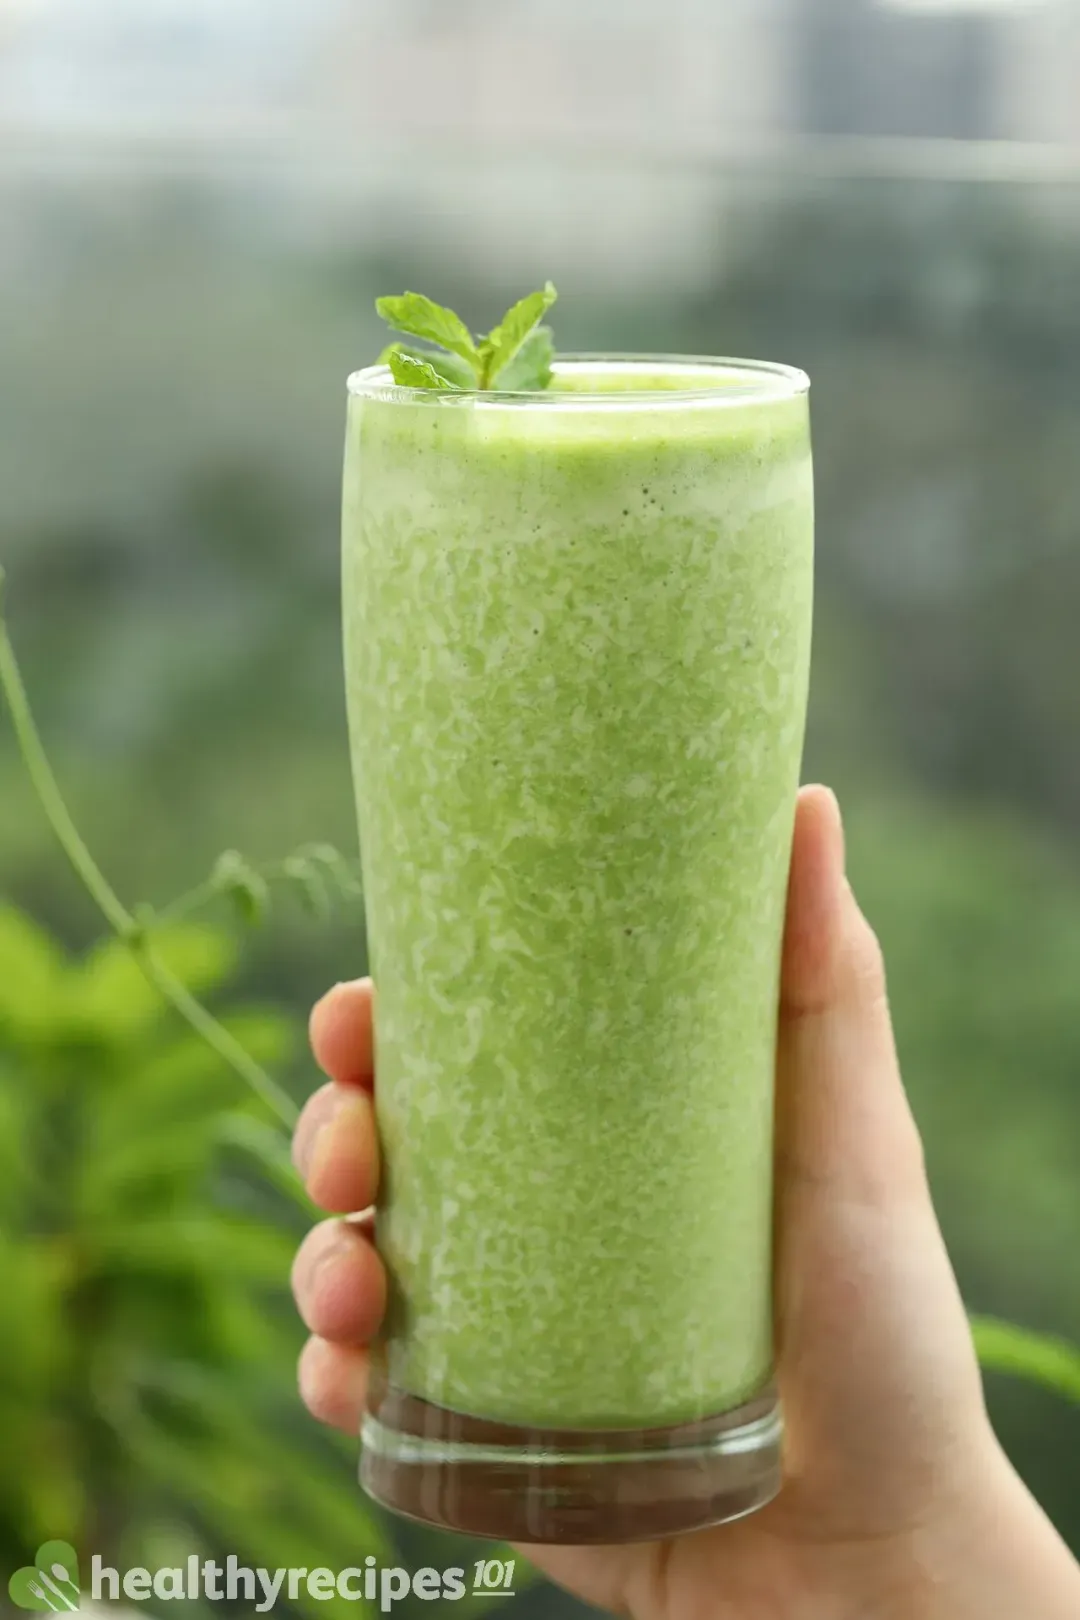 Benefits of Spinach Smoothie